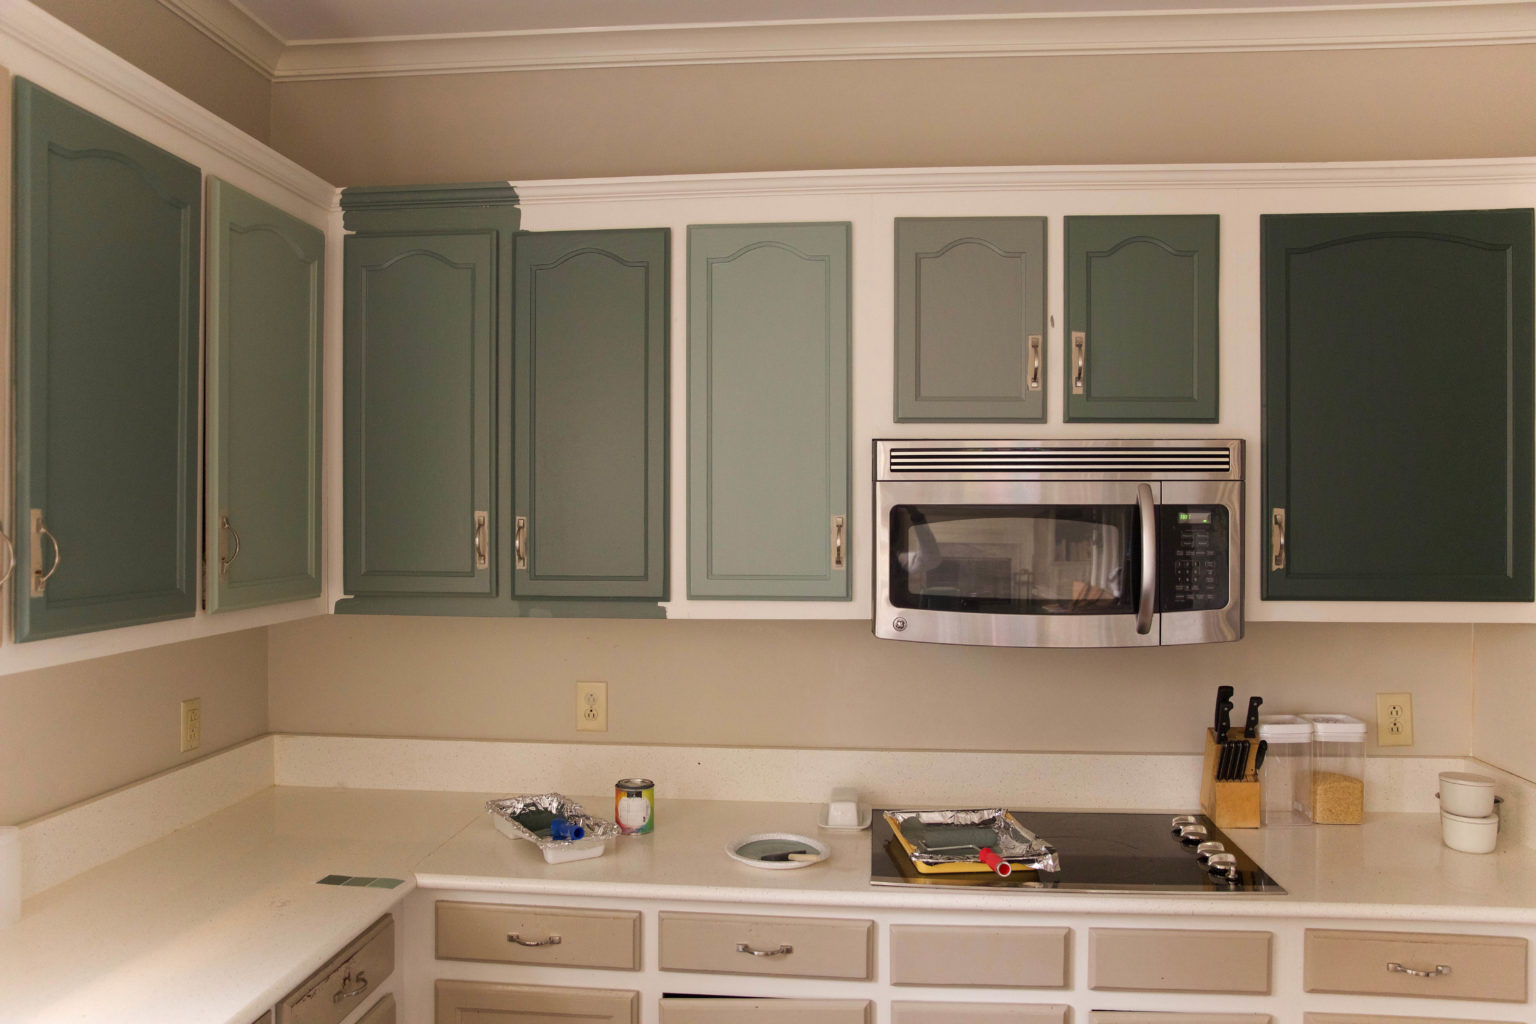 Kitchen Series: Going Green - In Honor Of Design